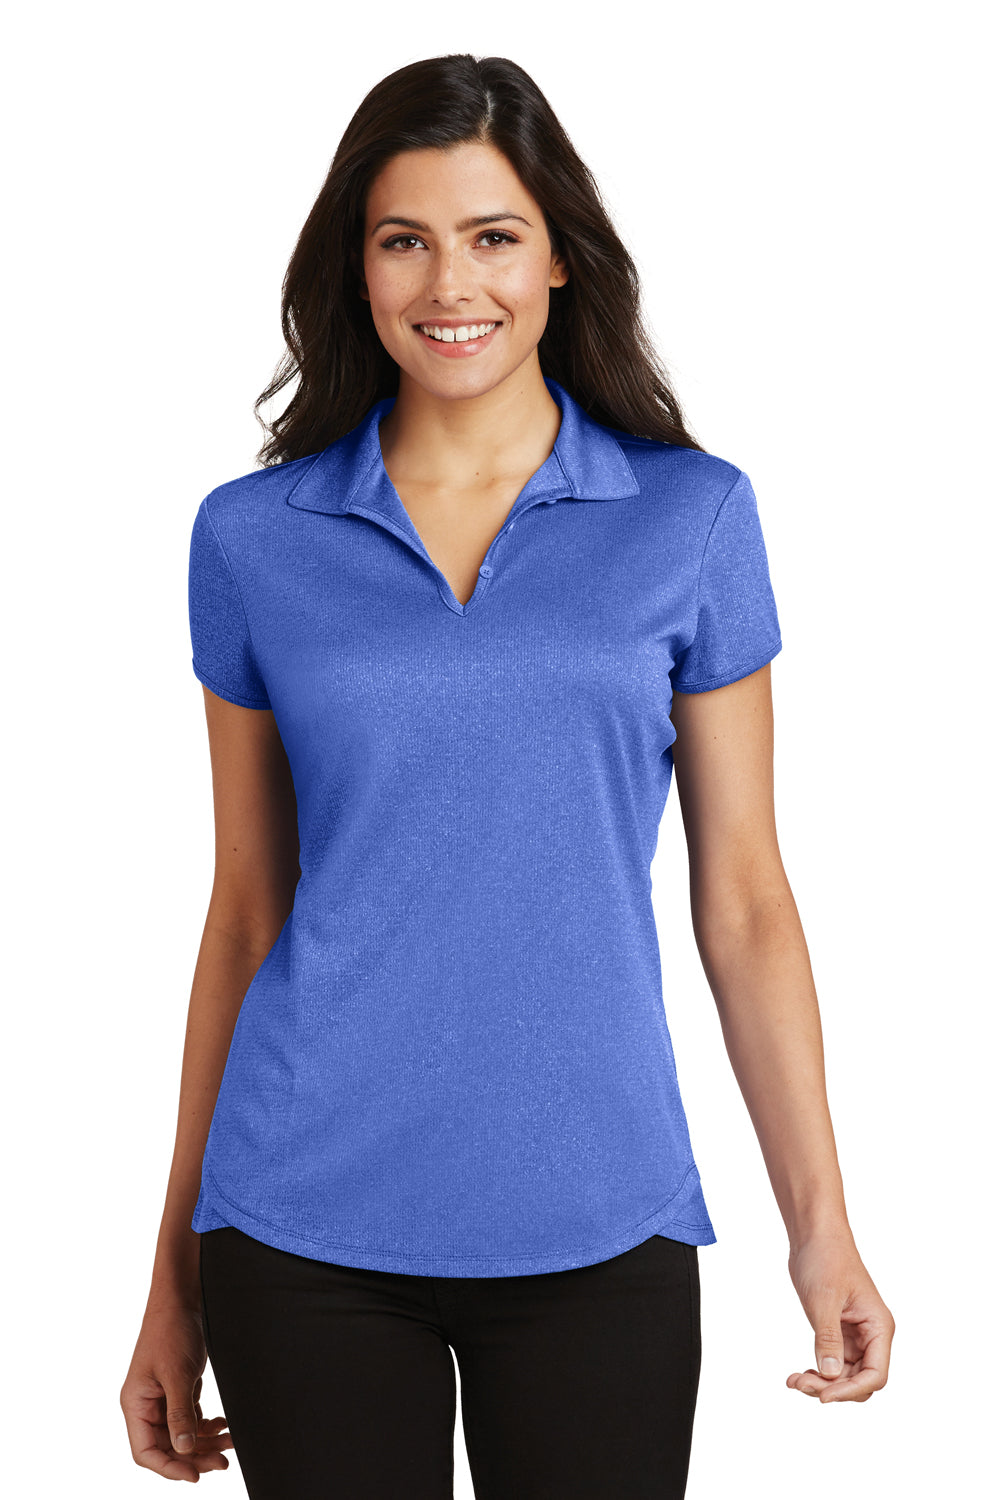 Port Authority L576 Womens Trace Moisture Wicking Short Sleeve Polo Shirt Heather Royal Blue Front